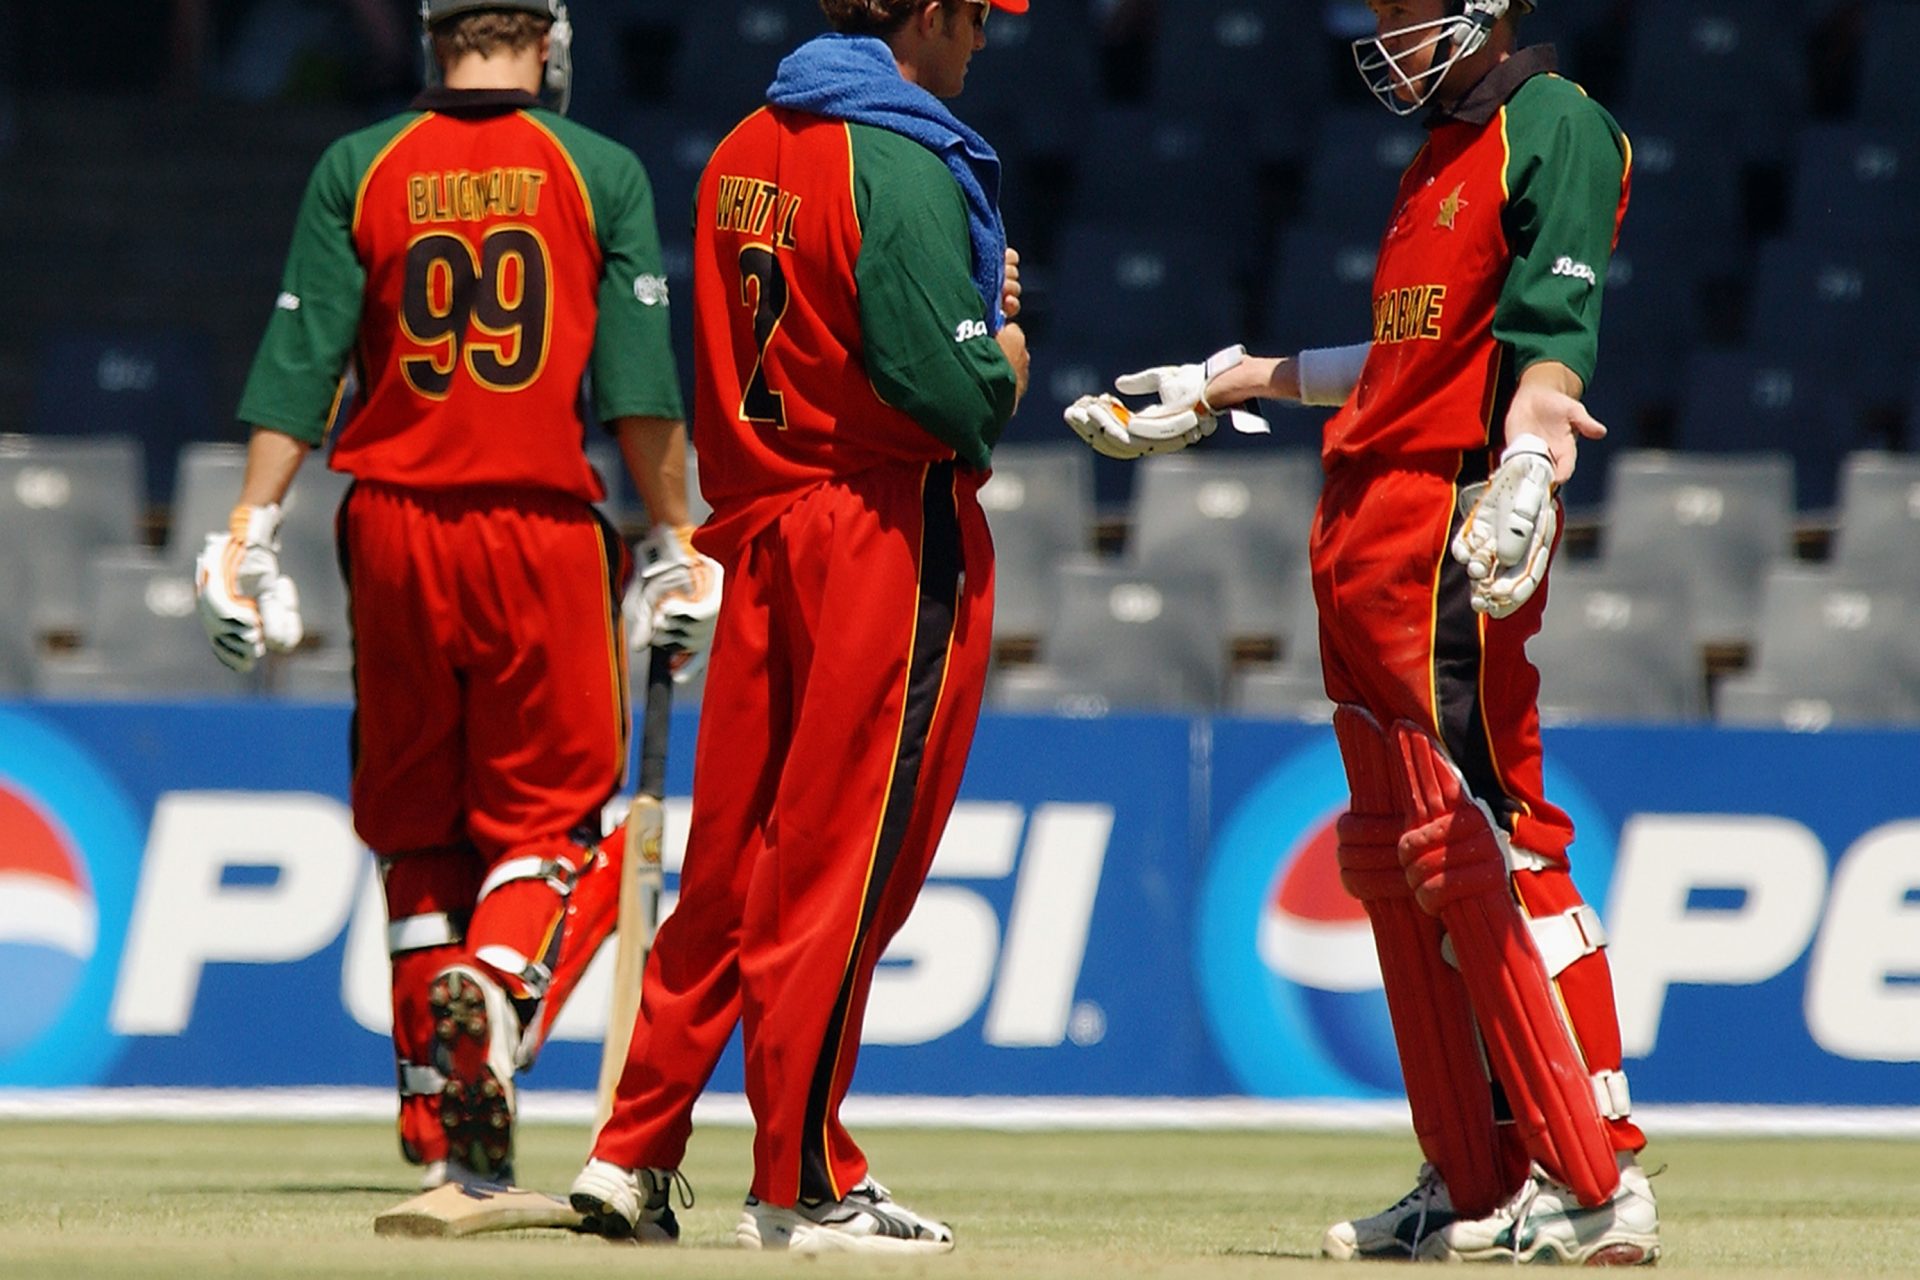 6: Henry Olonga and Andy Flower mourn